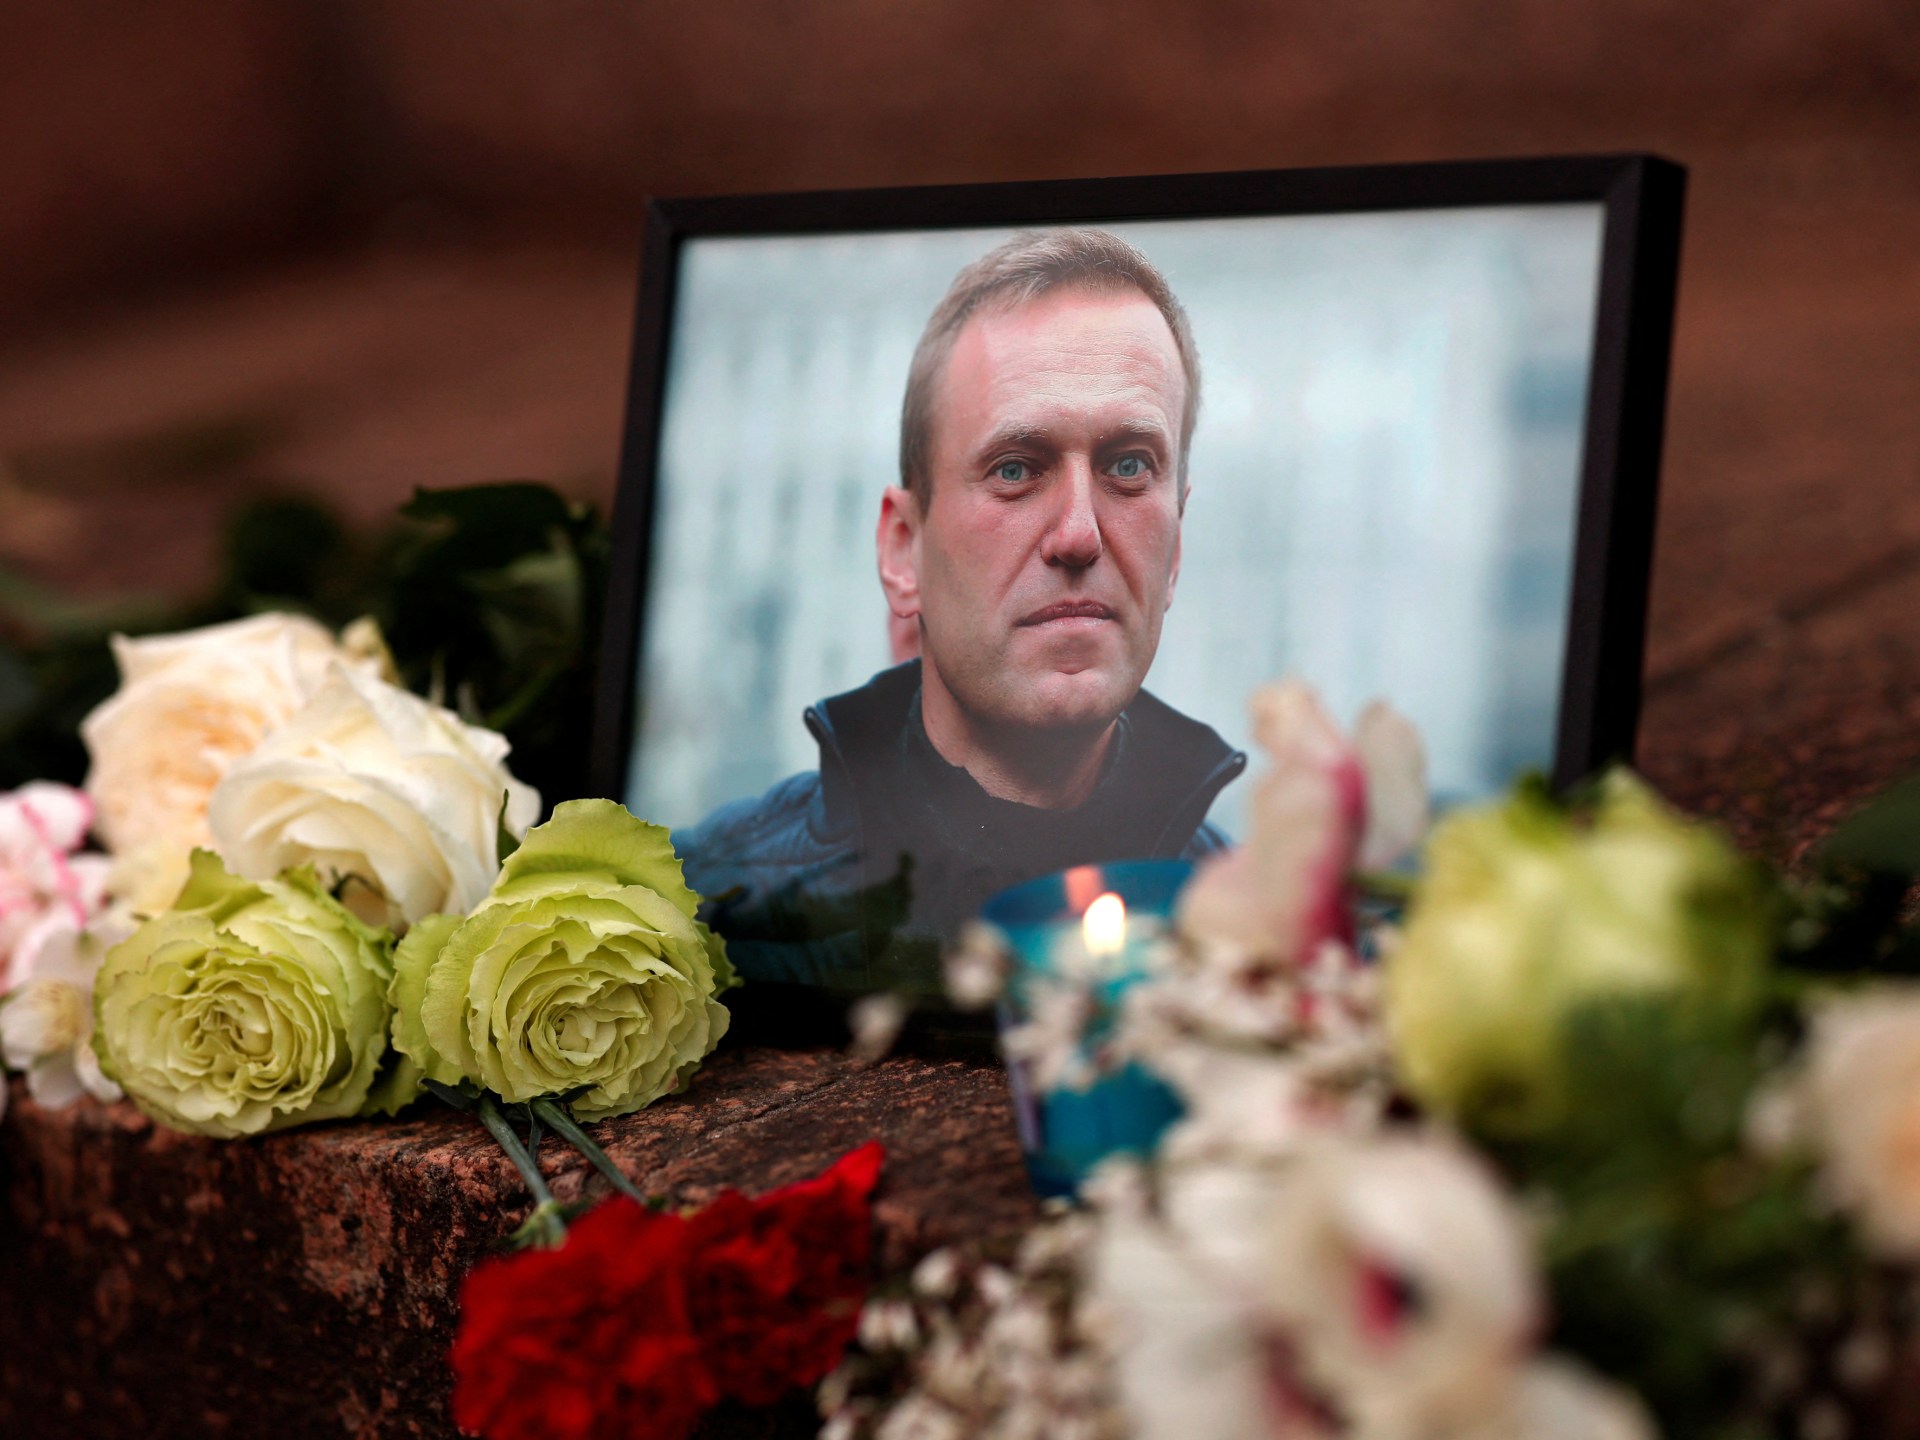 Hard void to fill: Navalny’s death poses challenges for Russian opposition | Obituaries News